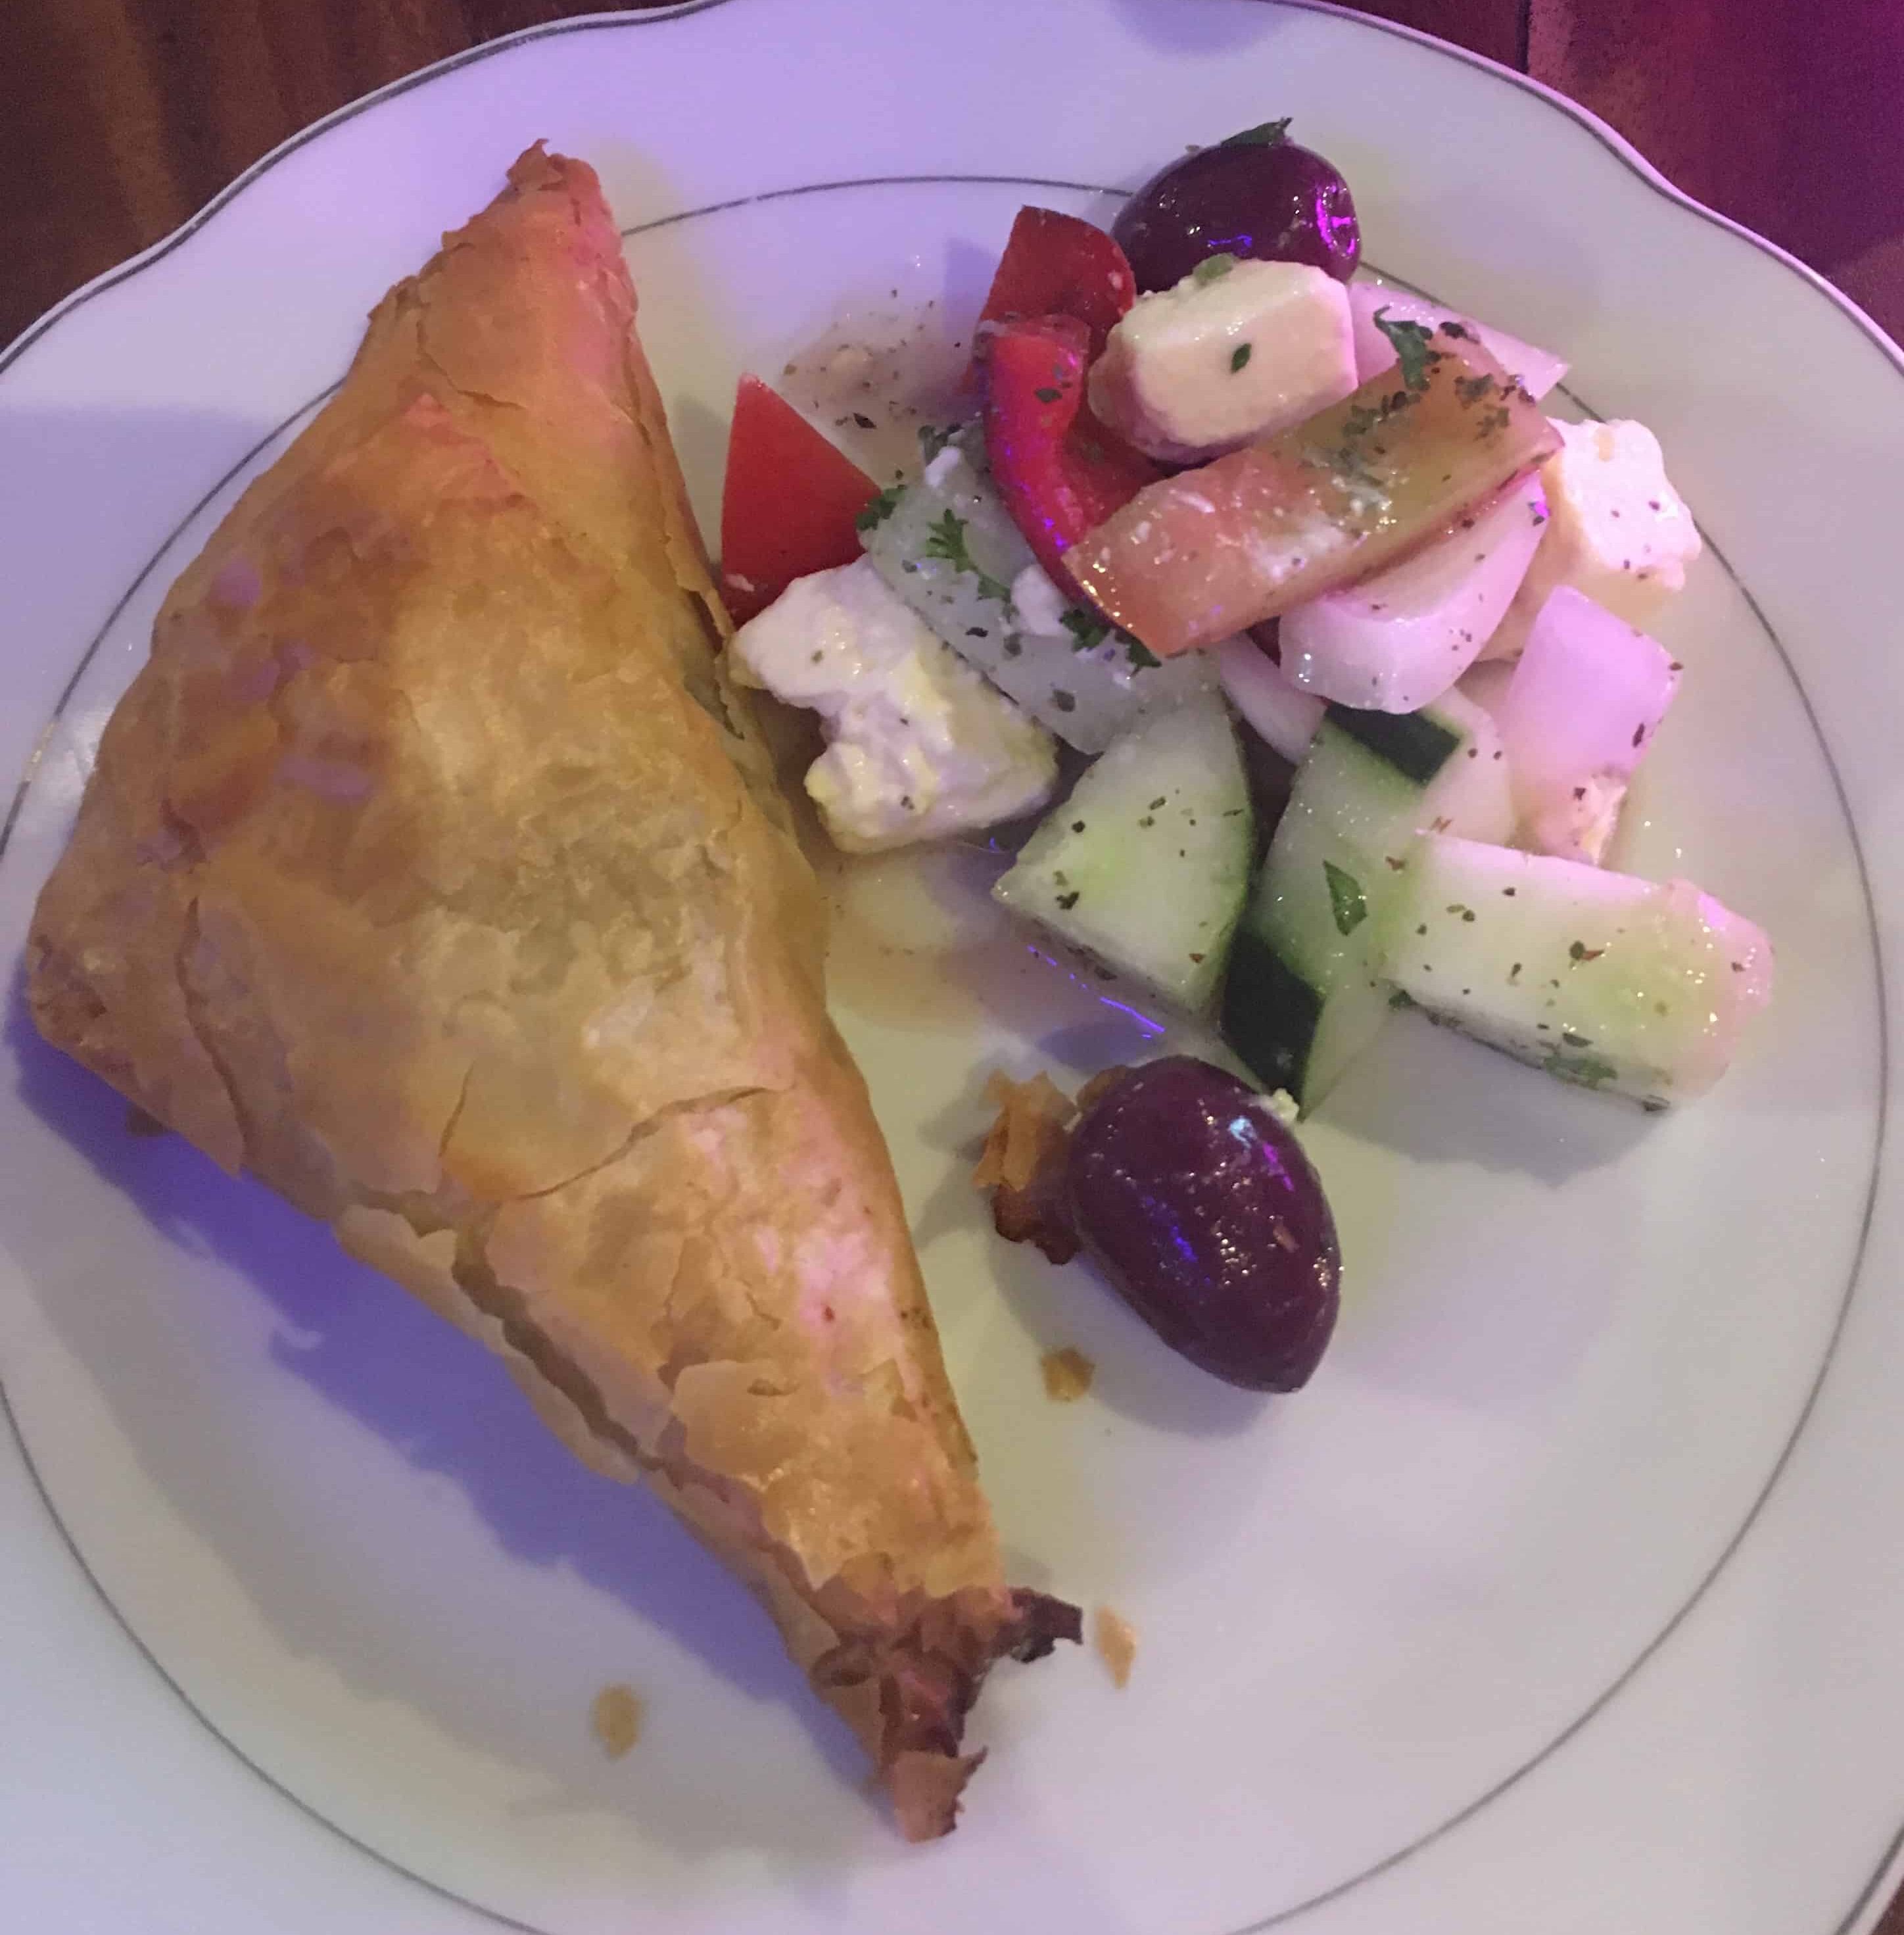 Spanakopita at The Greek Connection in Medellín, Antioquia, Colombia